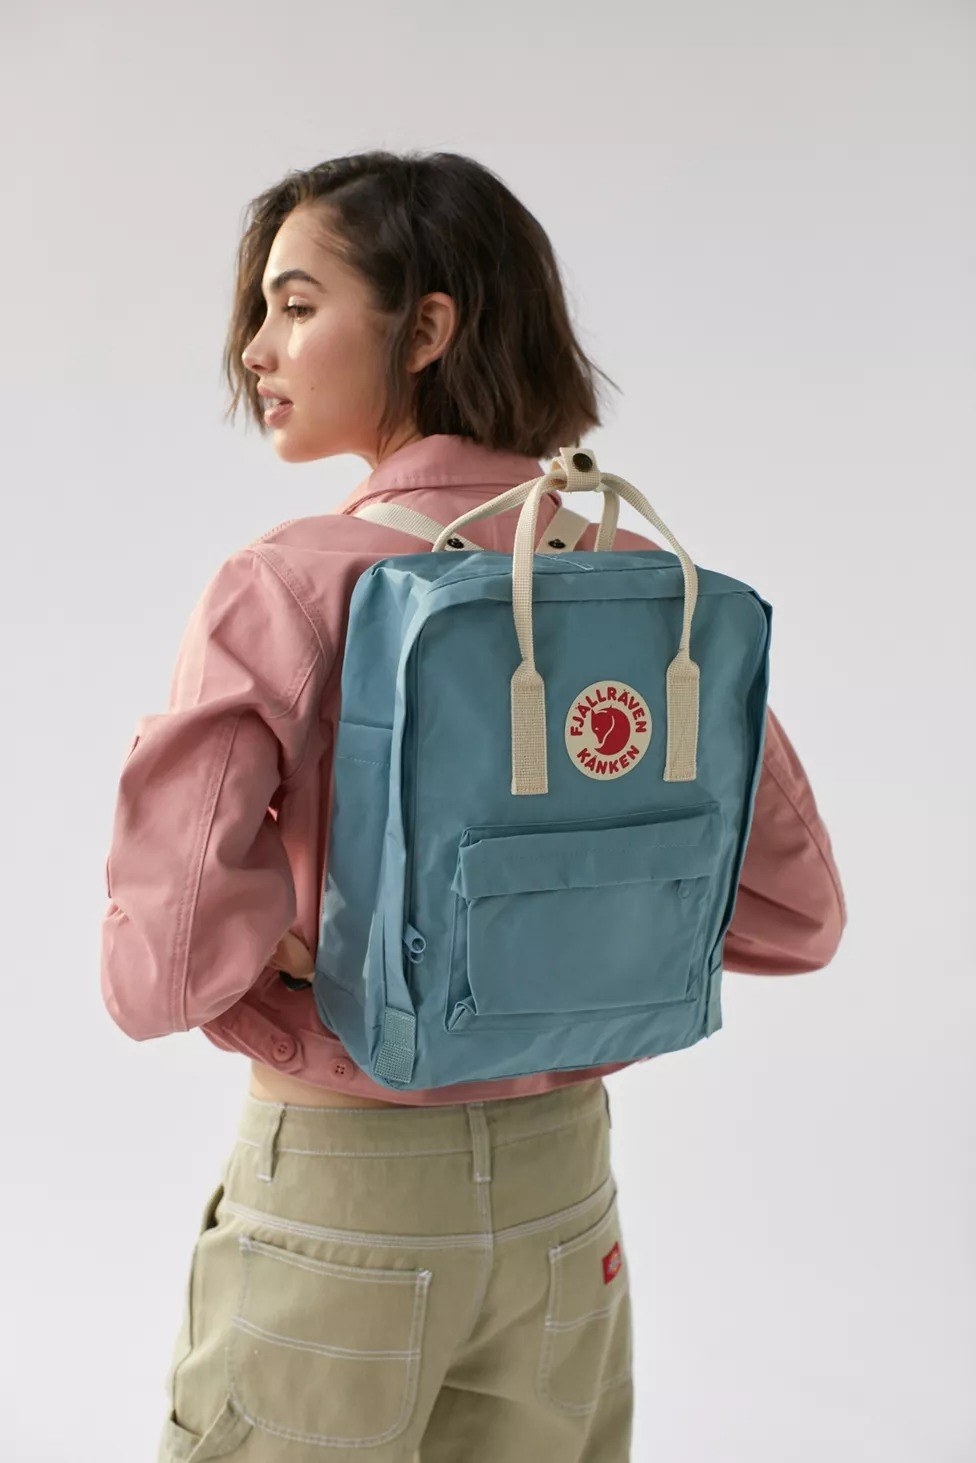 Model with the rectangle-shaped backpack with top handles, and a big front zippered pocket in blue